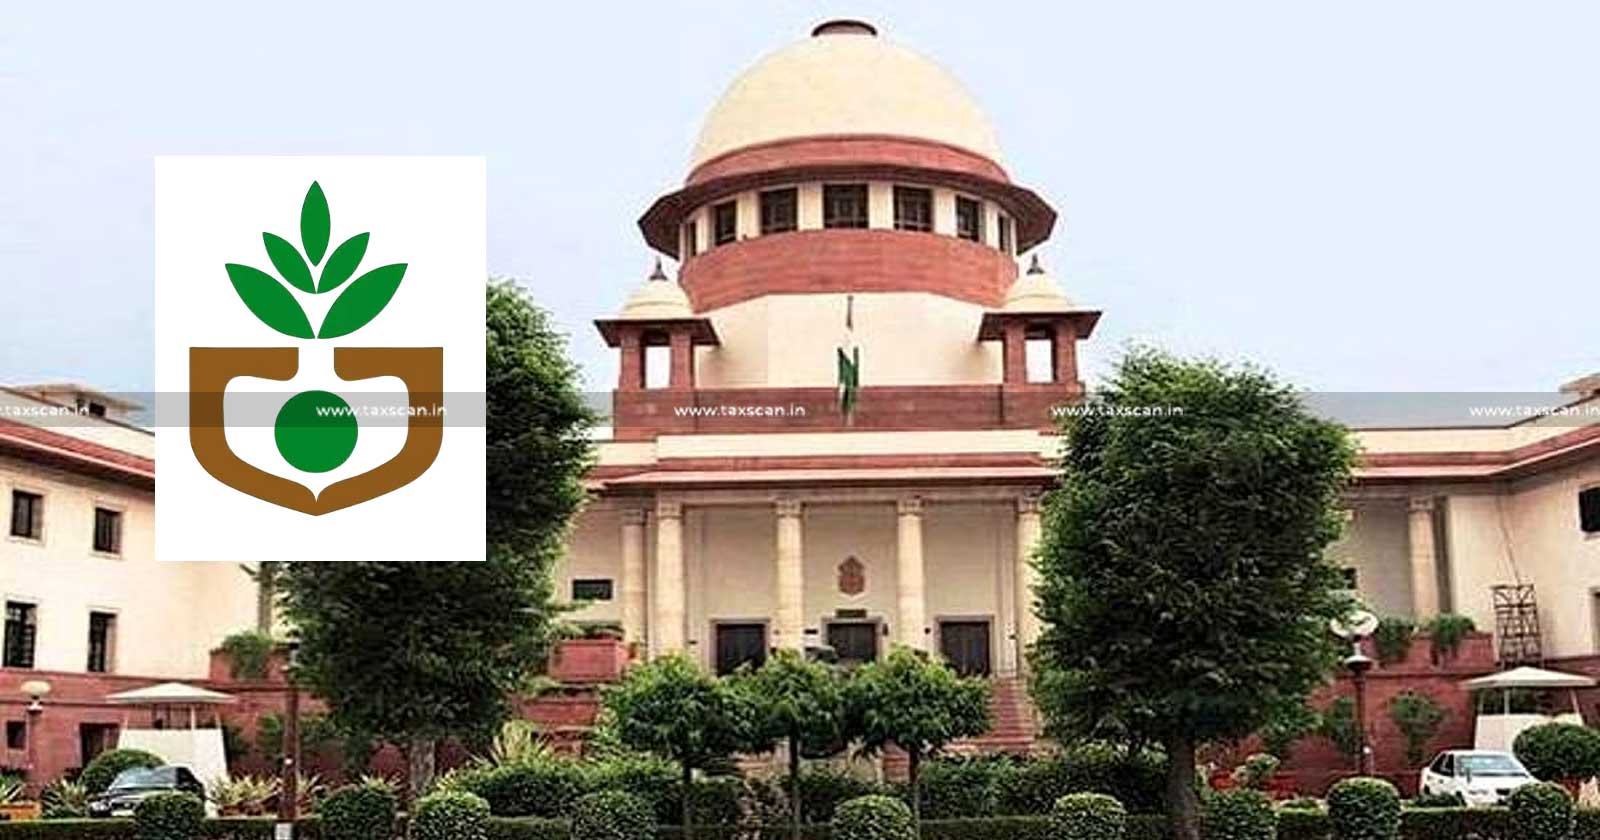 Supreme Court - Deduction Benefit under Income Tax Act - Income Tax - Deduction Benefit - Deduction - Kerala State Cooperative Agricultural and Rural Devt Bank - taxscan